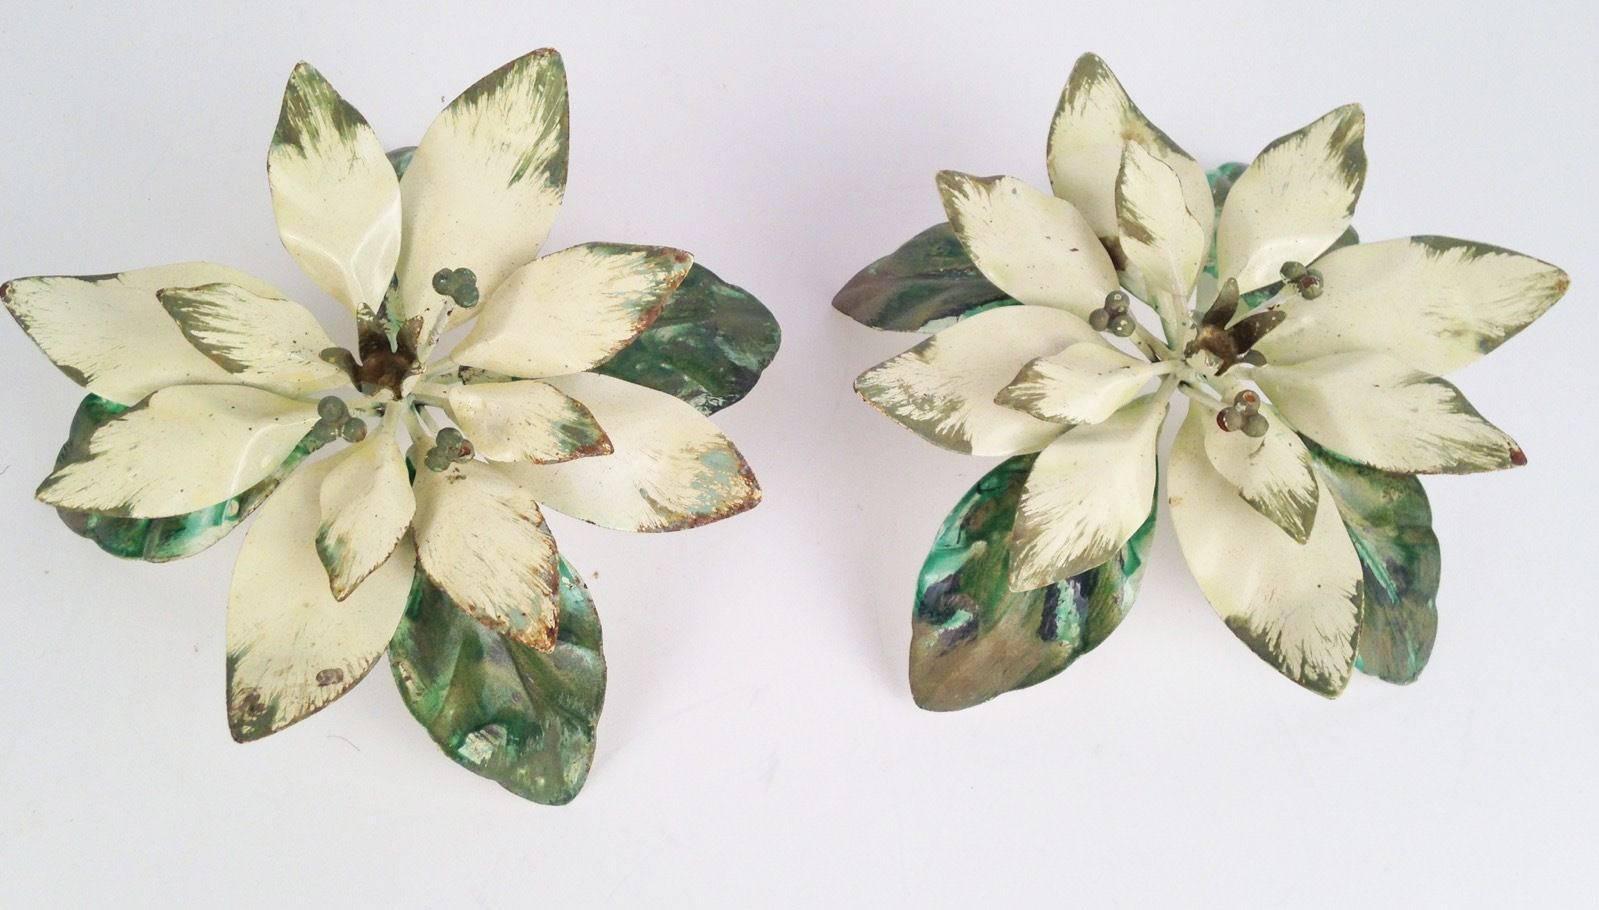 Stunning pair of shabby vintage metal tole flower candleholders made in Italy by Neiman Marcus.
Pair is in beautiful vintage condition and still holds the original Neiman Marcus Made in Italy sticker on underside. 
The flowers and leaves are done